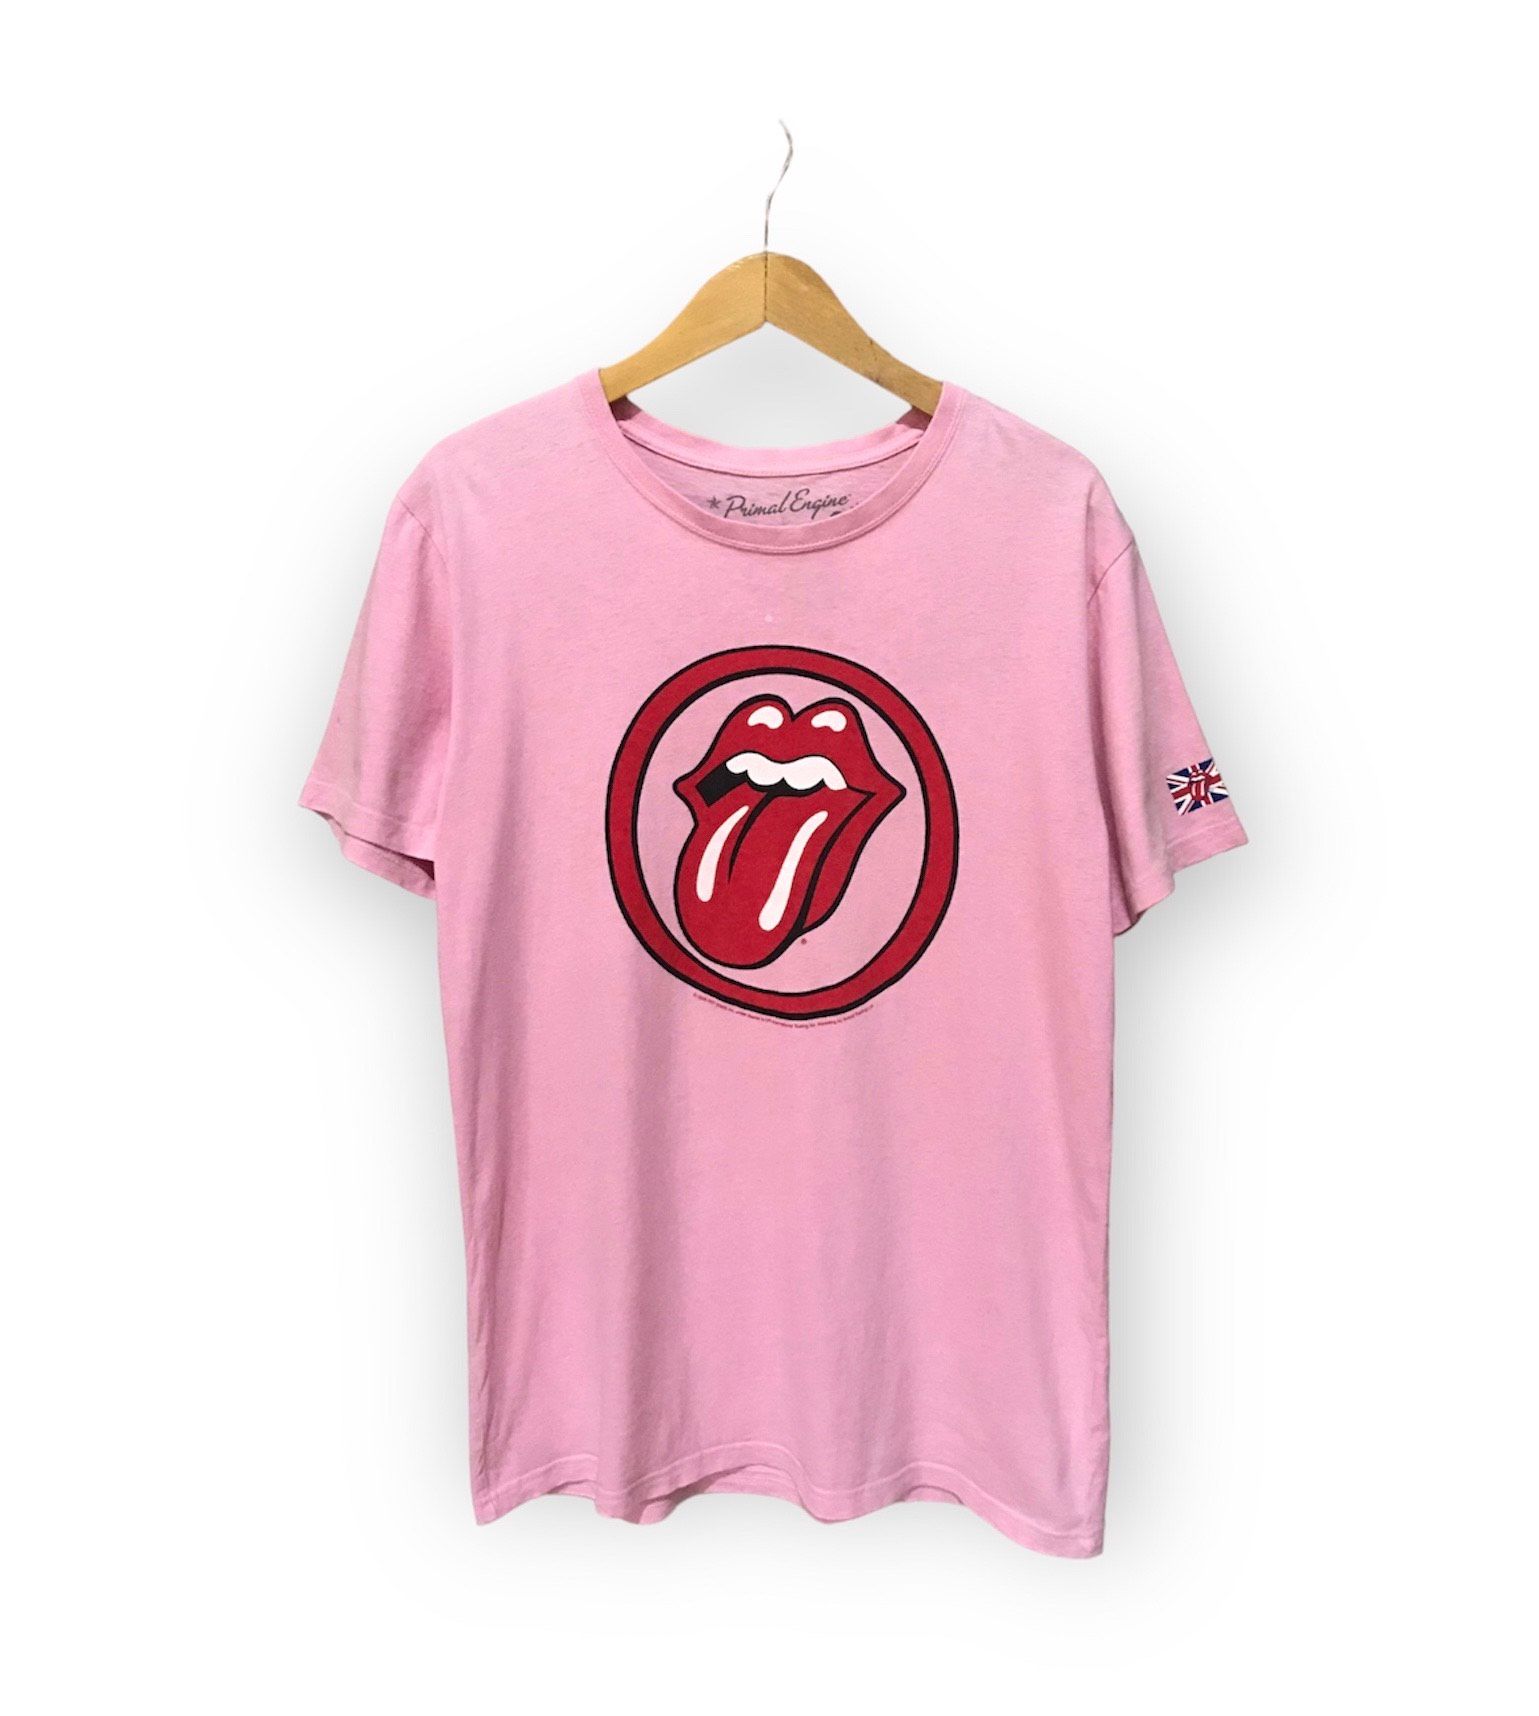 The Rolling Stones Rare The rolling Stones X japanese market pink t shirt Size US L / EU 52-54 / 3 - 1 Preview